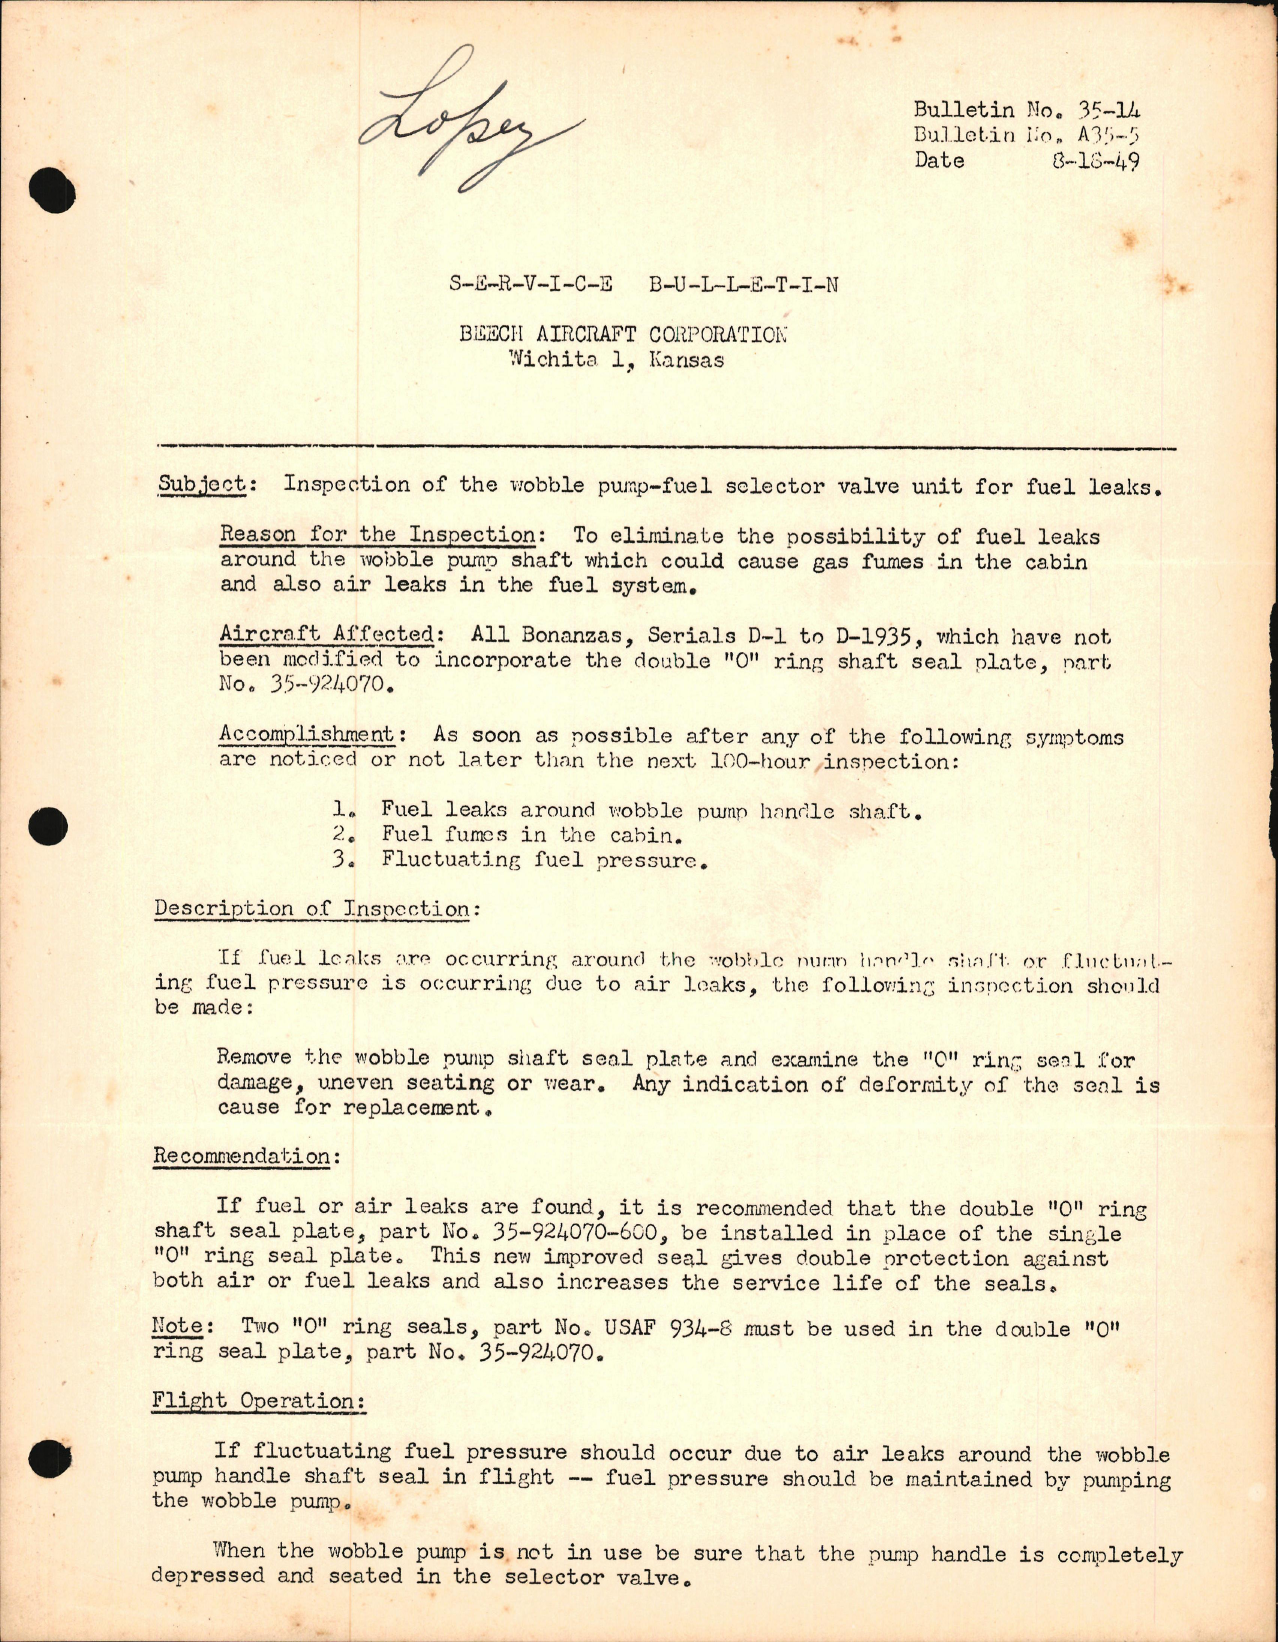 Sample page 1 from AirCorps Library document: Inspection of the Wobble Pump-Fuel Selector Valve Unit for Fuel Leaks